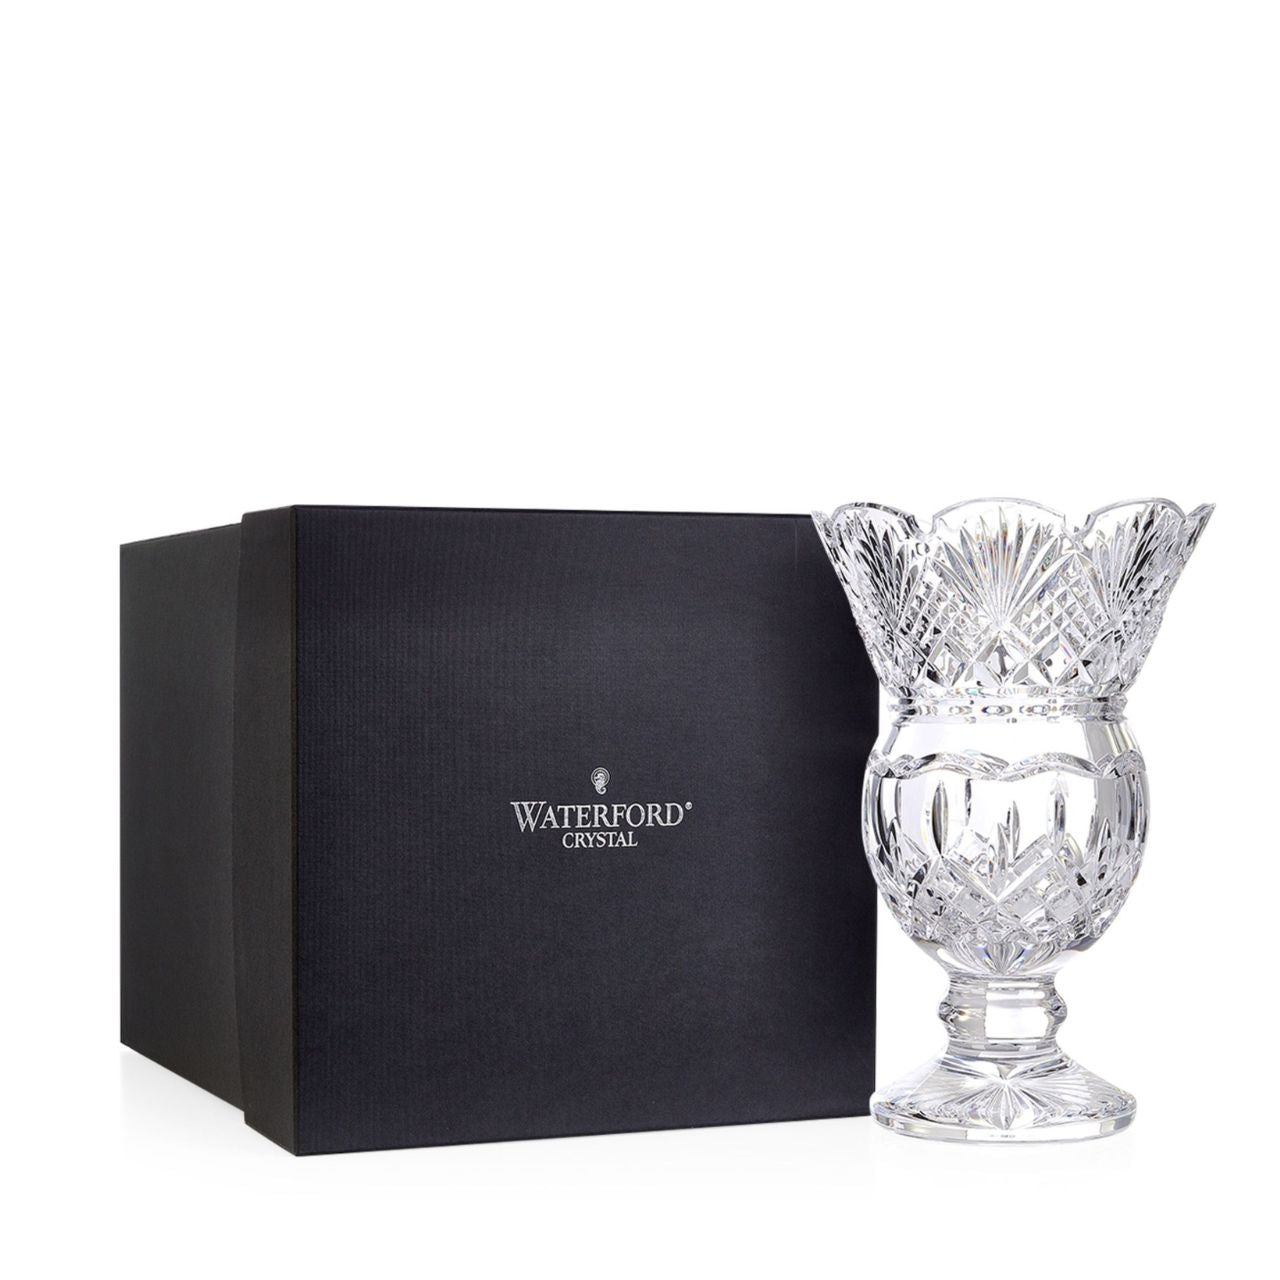 Waterford Crystal Lismore 32.5cm Thistle Vase  The Waterford Lismore pattern is a stunning combination of brilliance and clarity. You can't improve on nature, but you can come close with the Lismore 32.5cm Thistle Vase. This stunning fine crystal vase is patterned with Lismore's signature diamond and wedge cuts and features the stability and comforting weight you've come to expect from Waterford's hand-crafted, fine crystal.